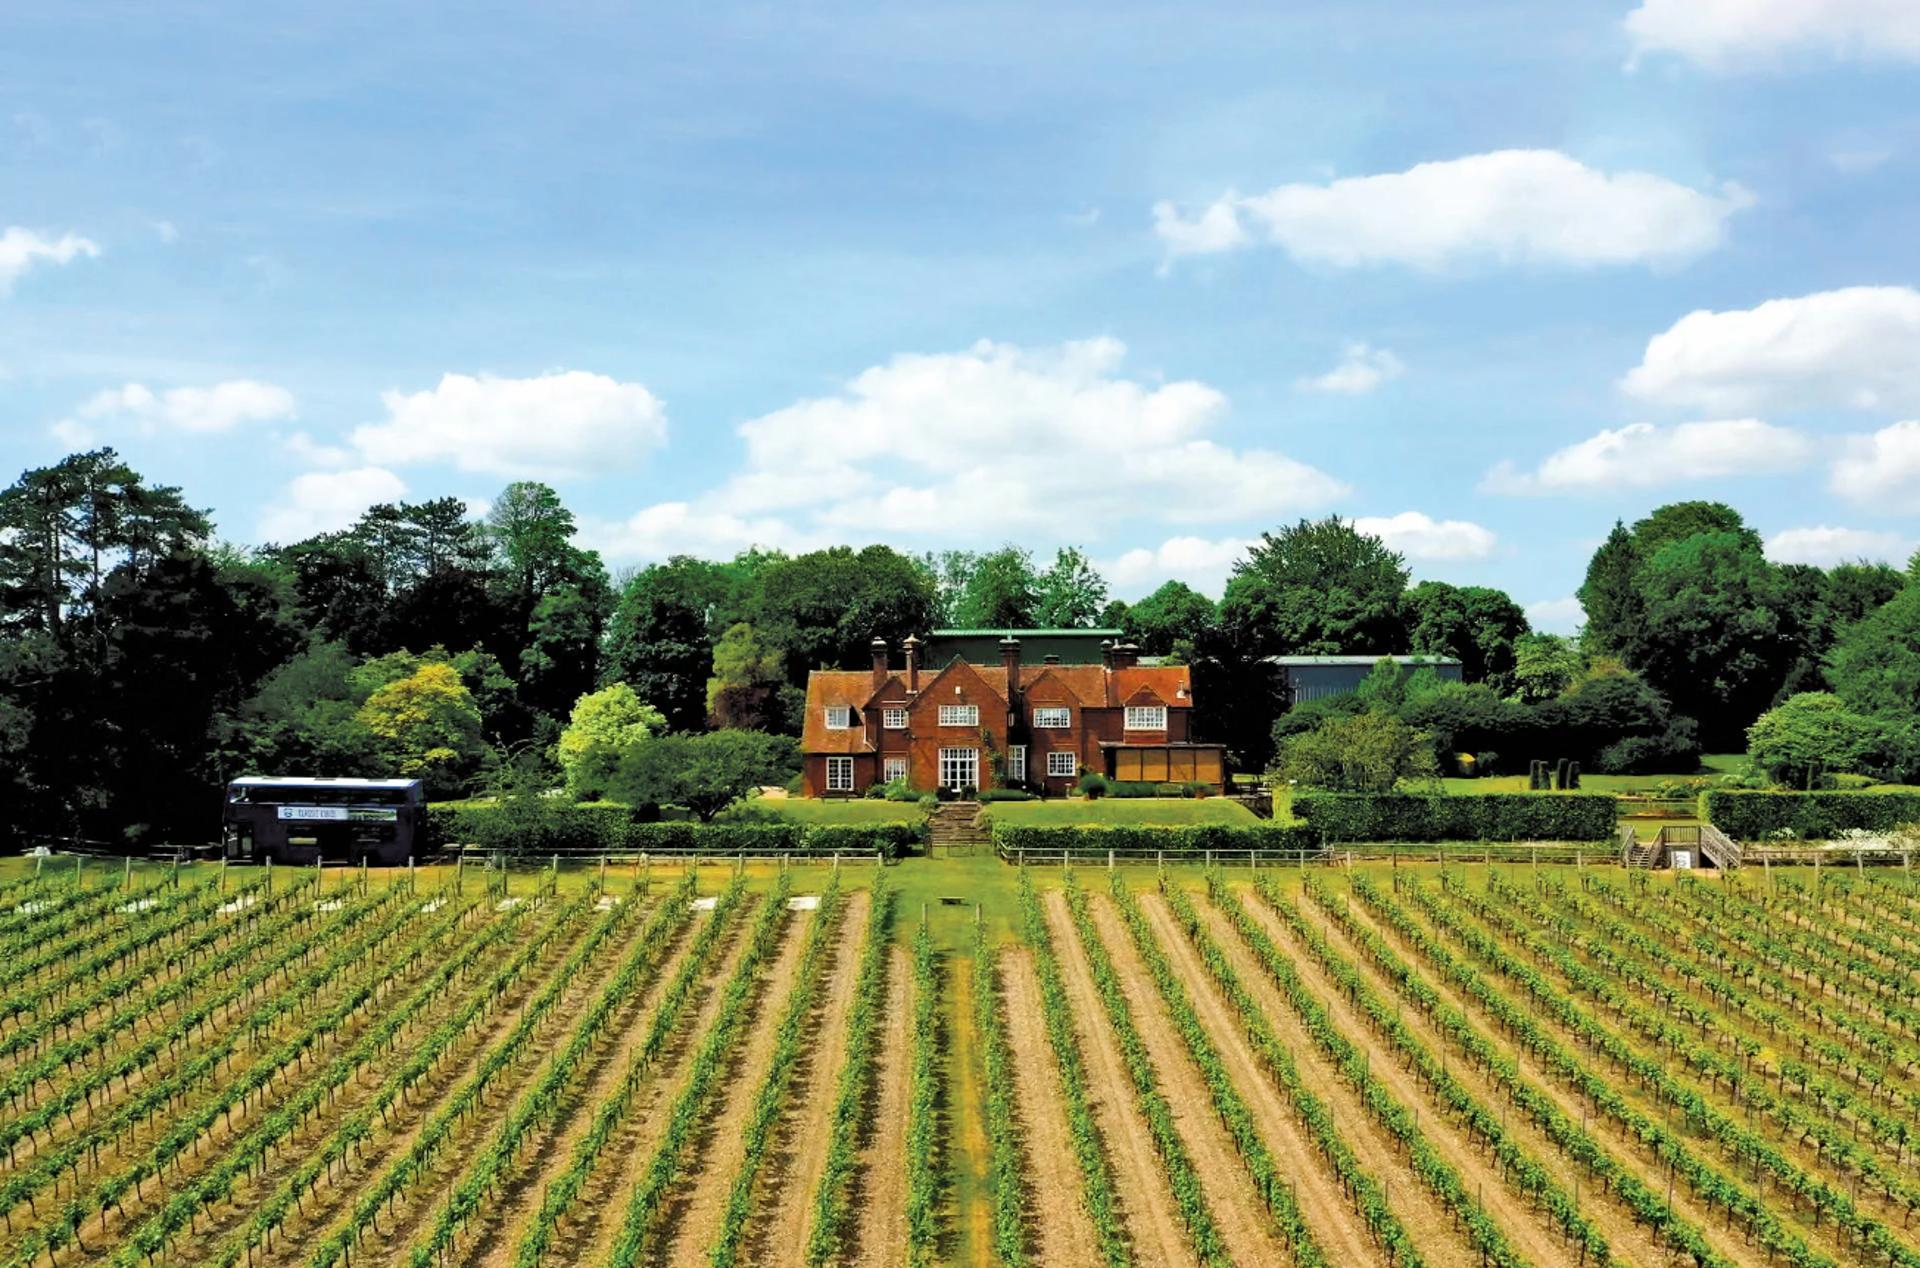 Takeover bid initiated for Britain’s oldest vineyard